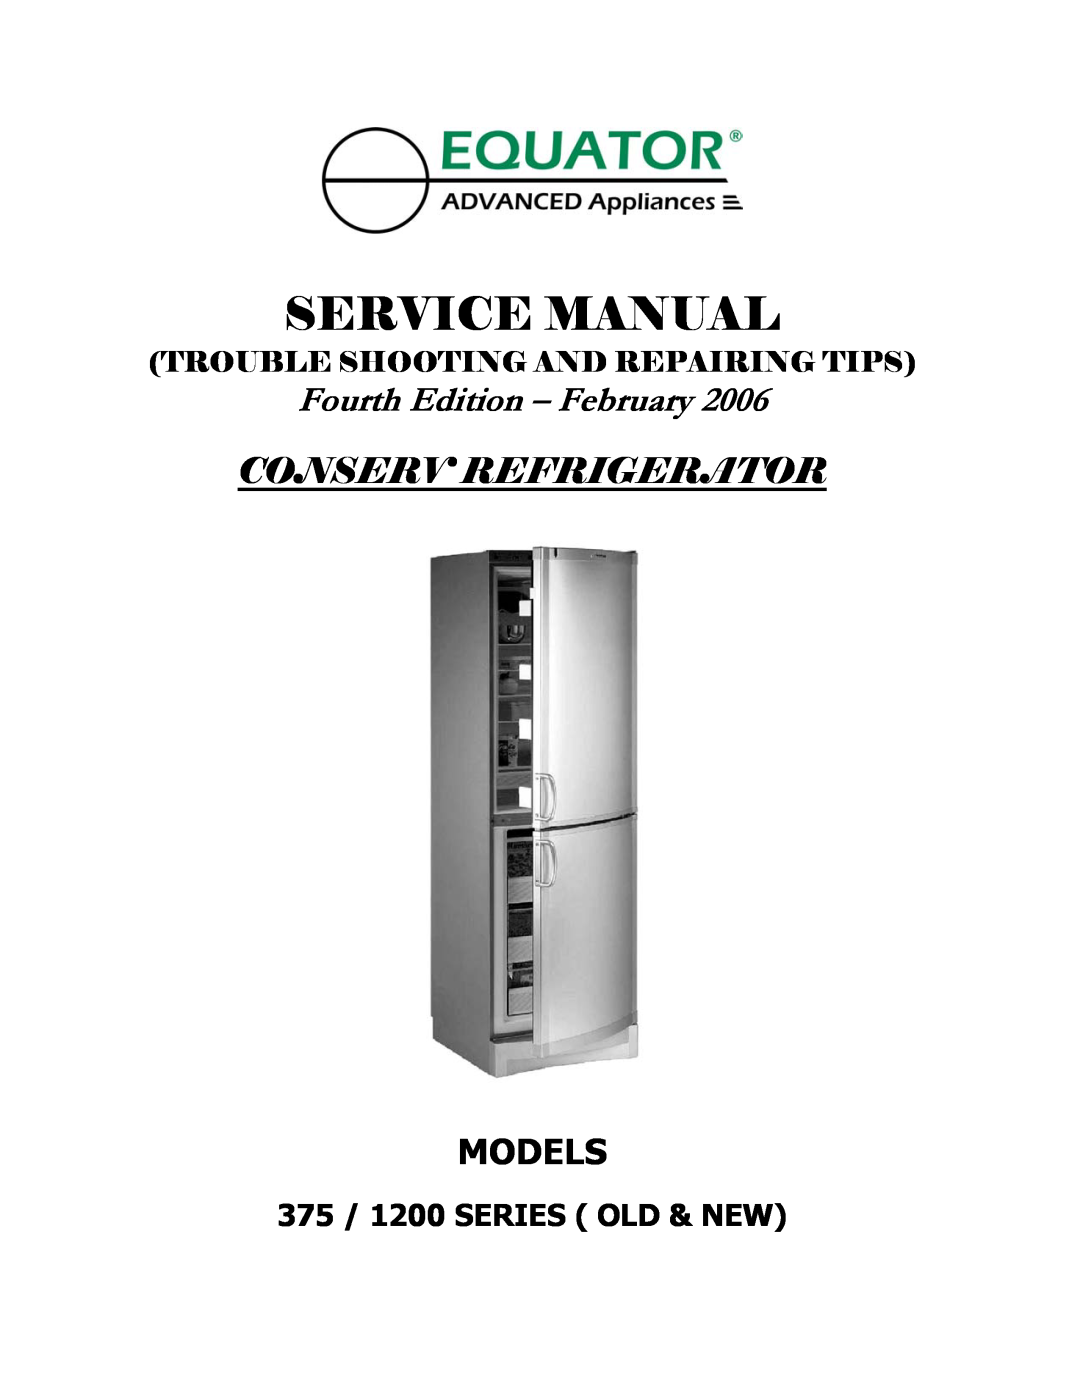 Equator service manual Fourth Edition – February, Conserv Refrigerator, Models, 375 / 1200 SERIES OLD & NEW 